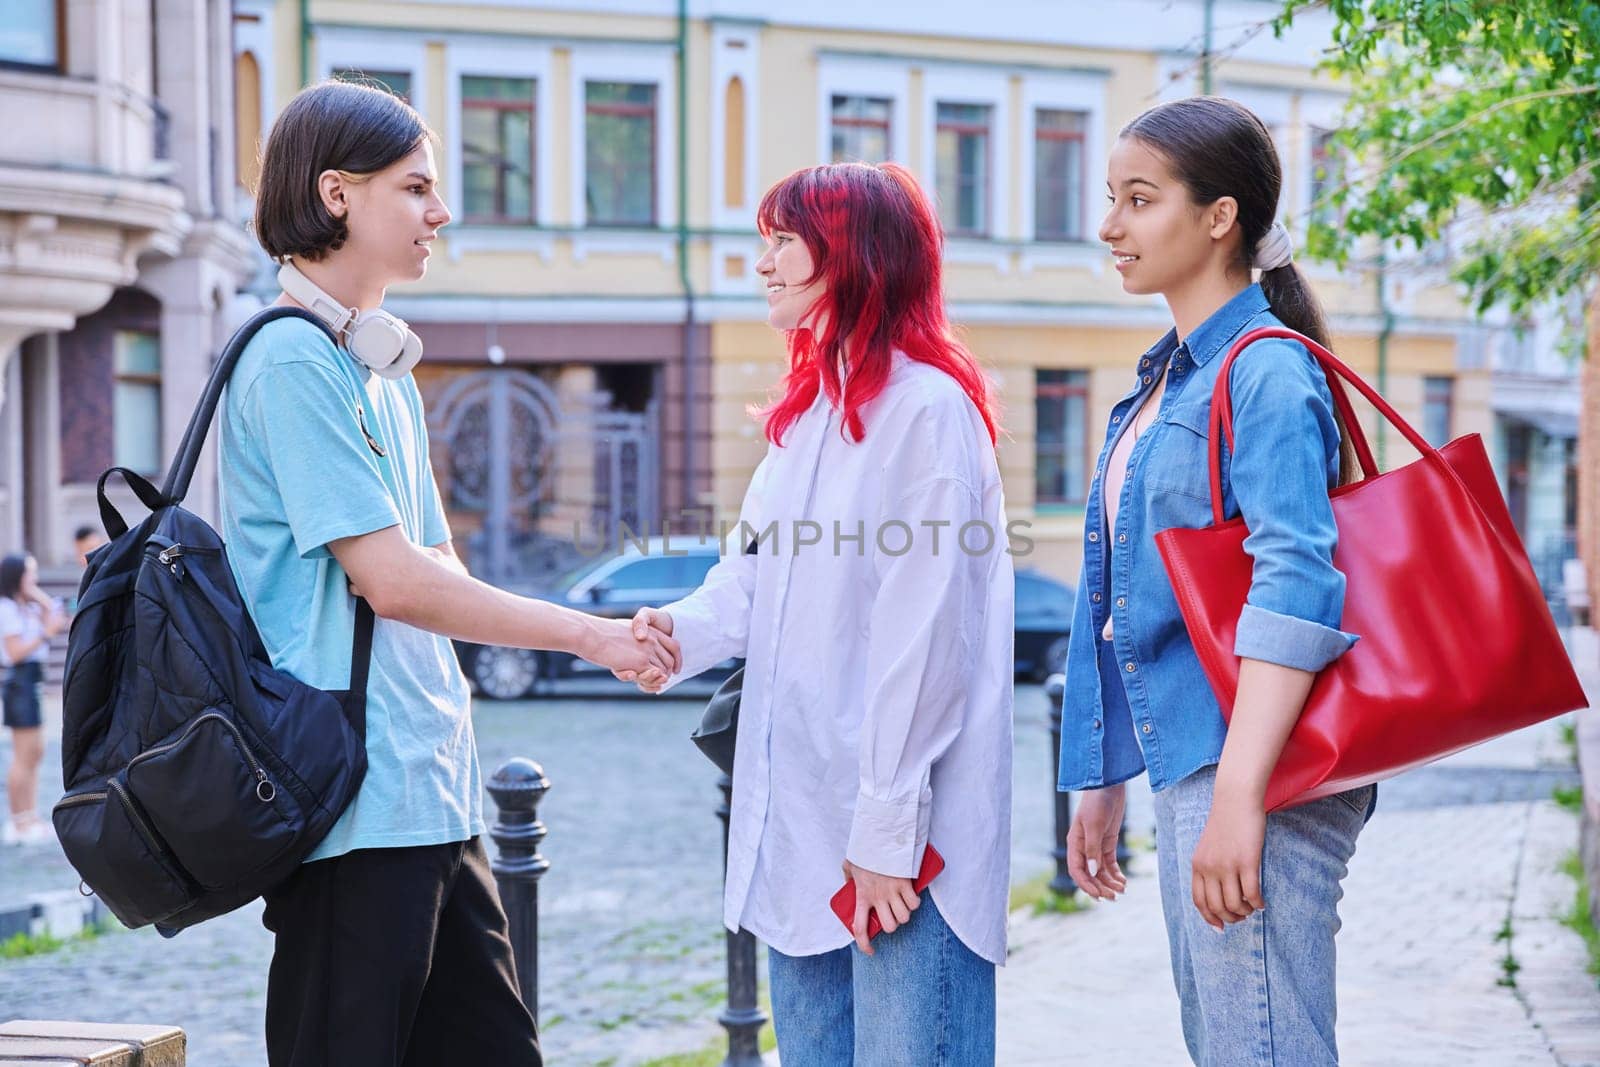 Meeting teenage friends outdoor, on street of city. Happy laughing talking young females and guy. Youth, communication, friendship, emotions, high school, college concept